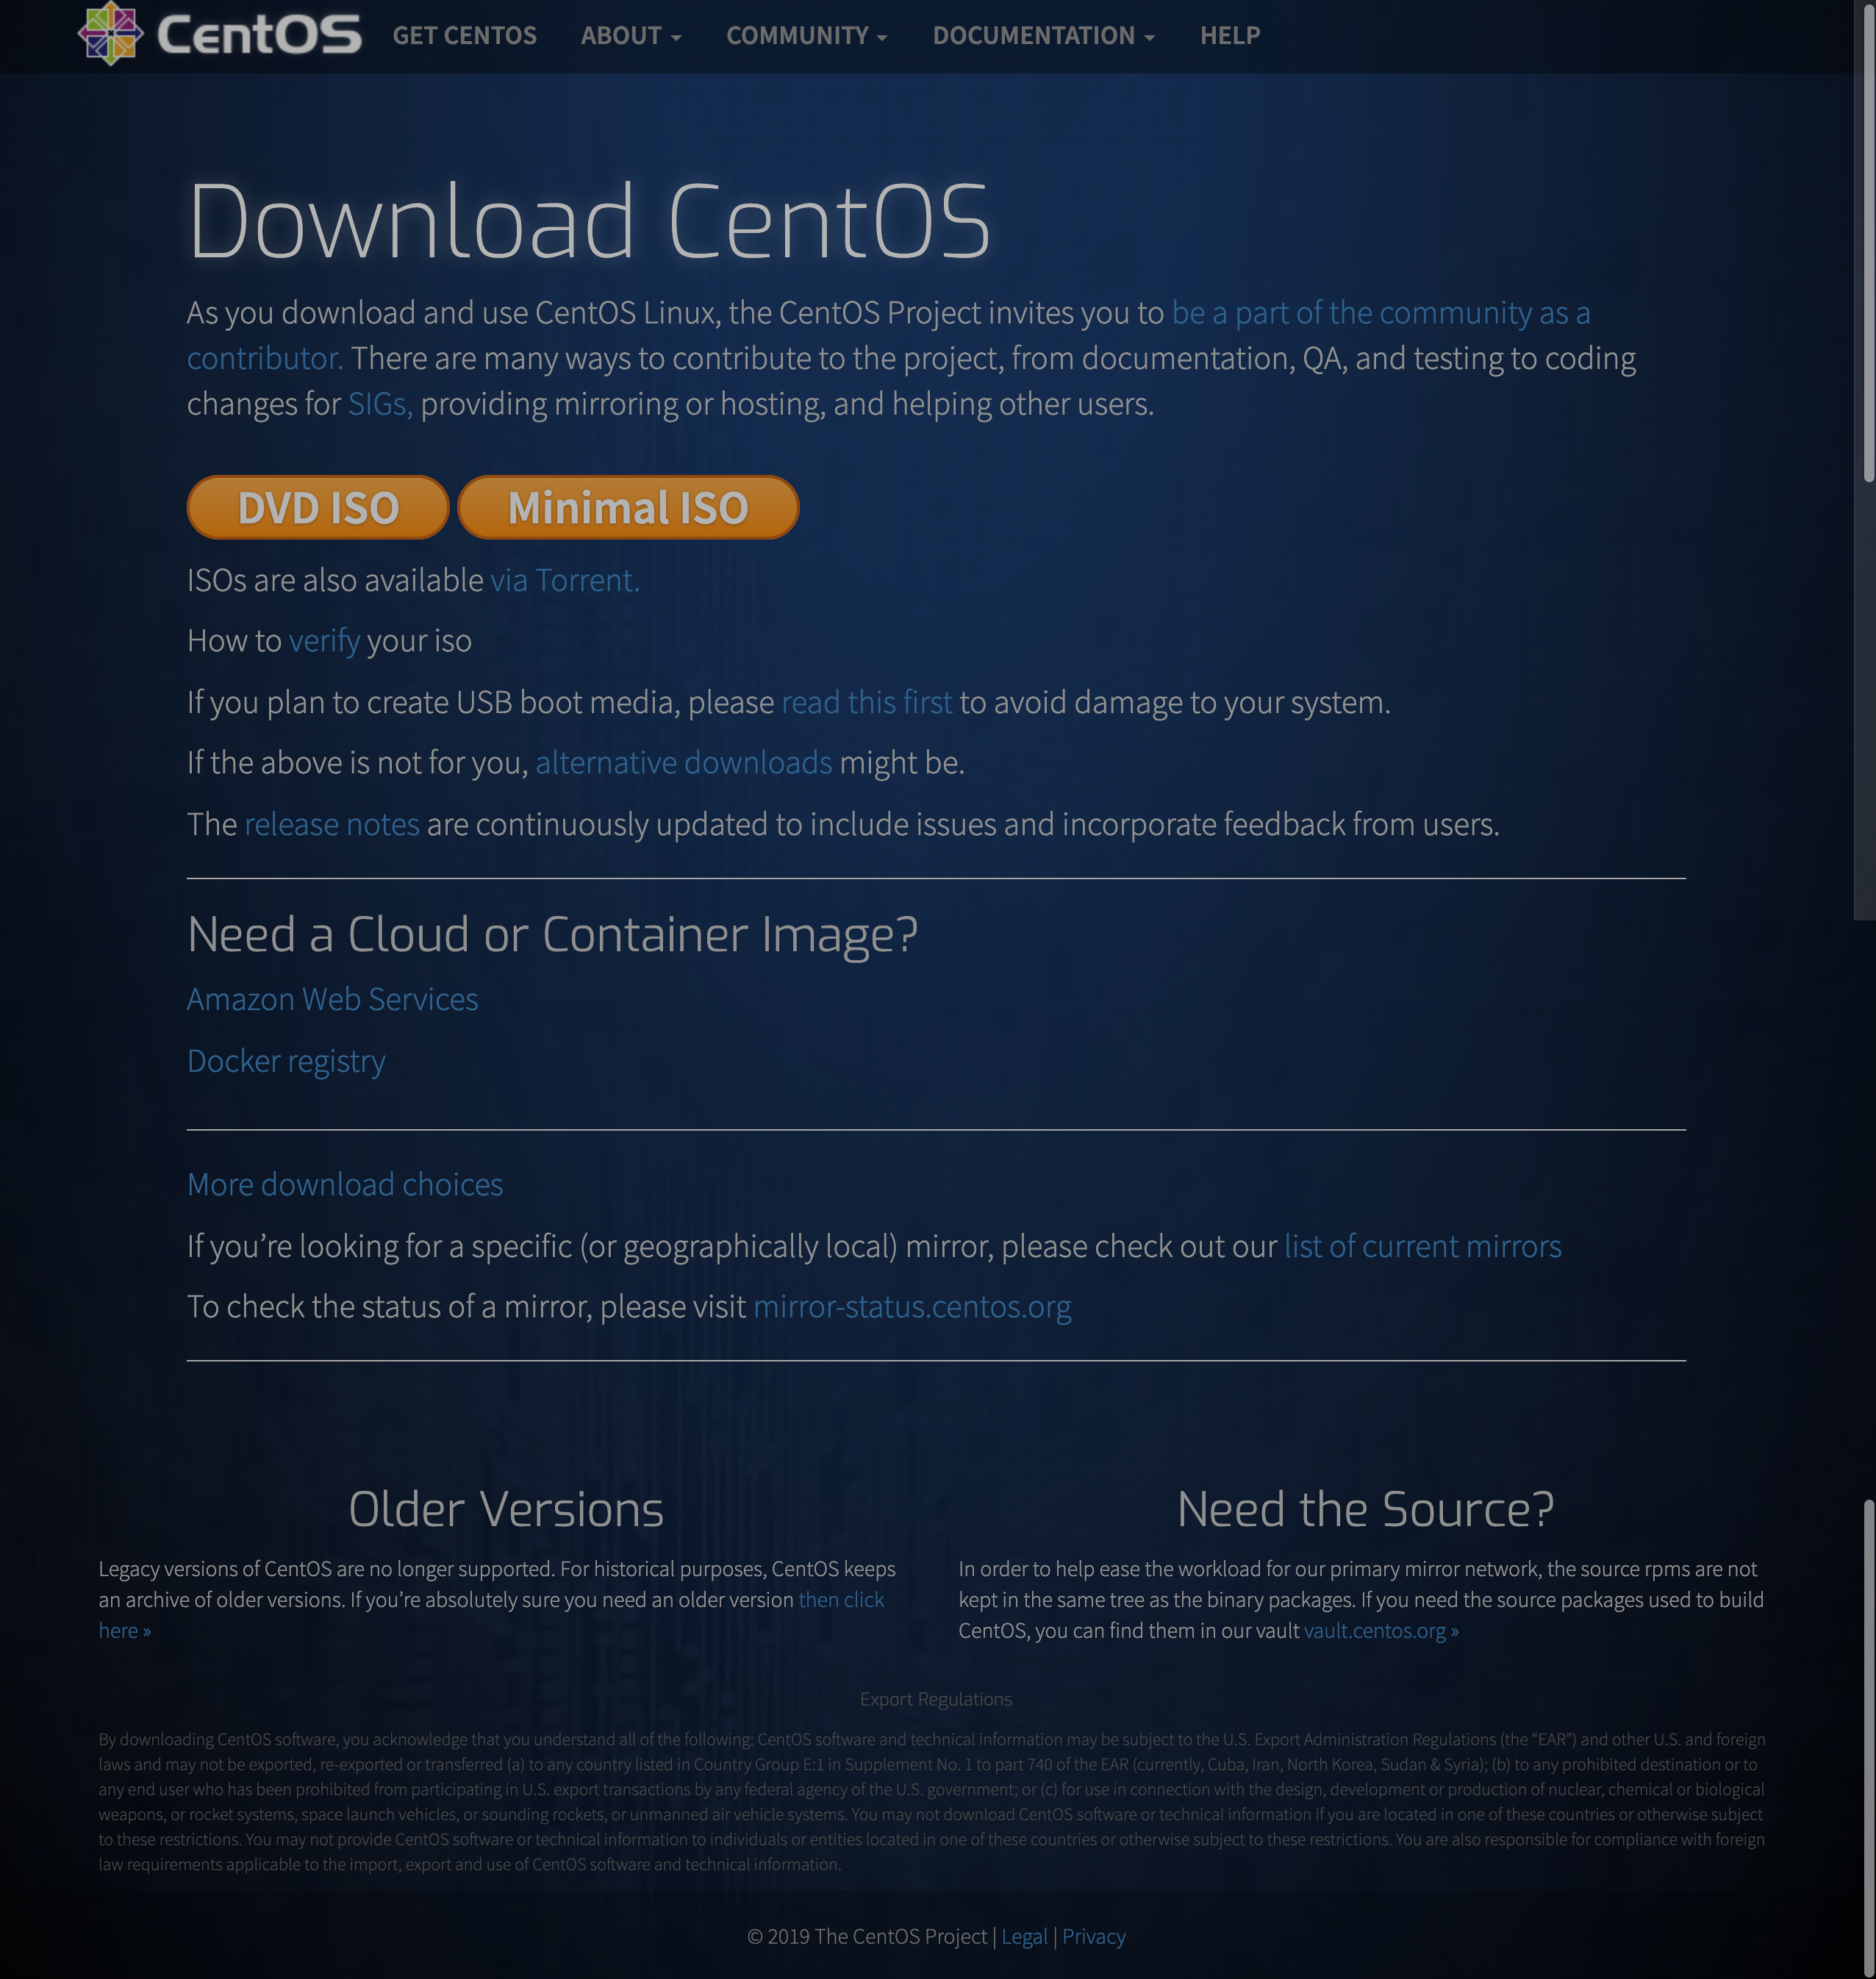 os-centos-download-preview.png